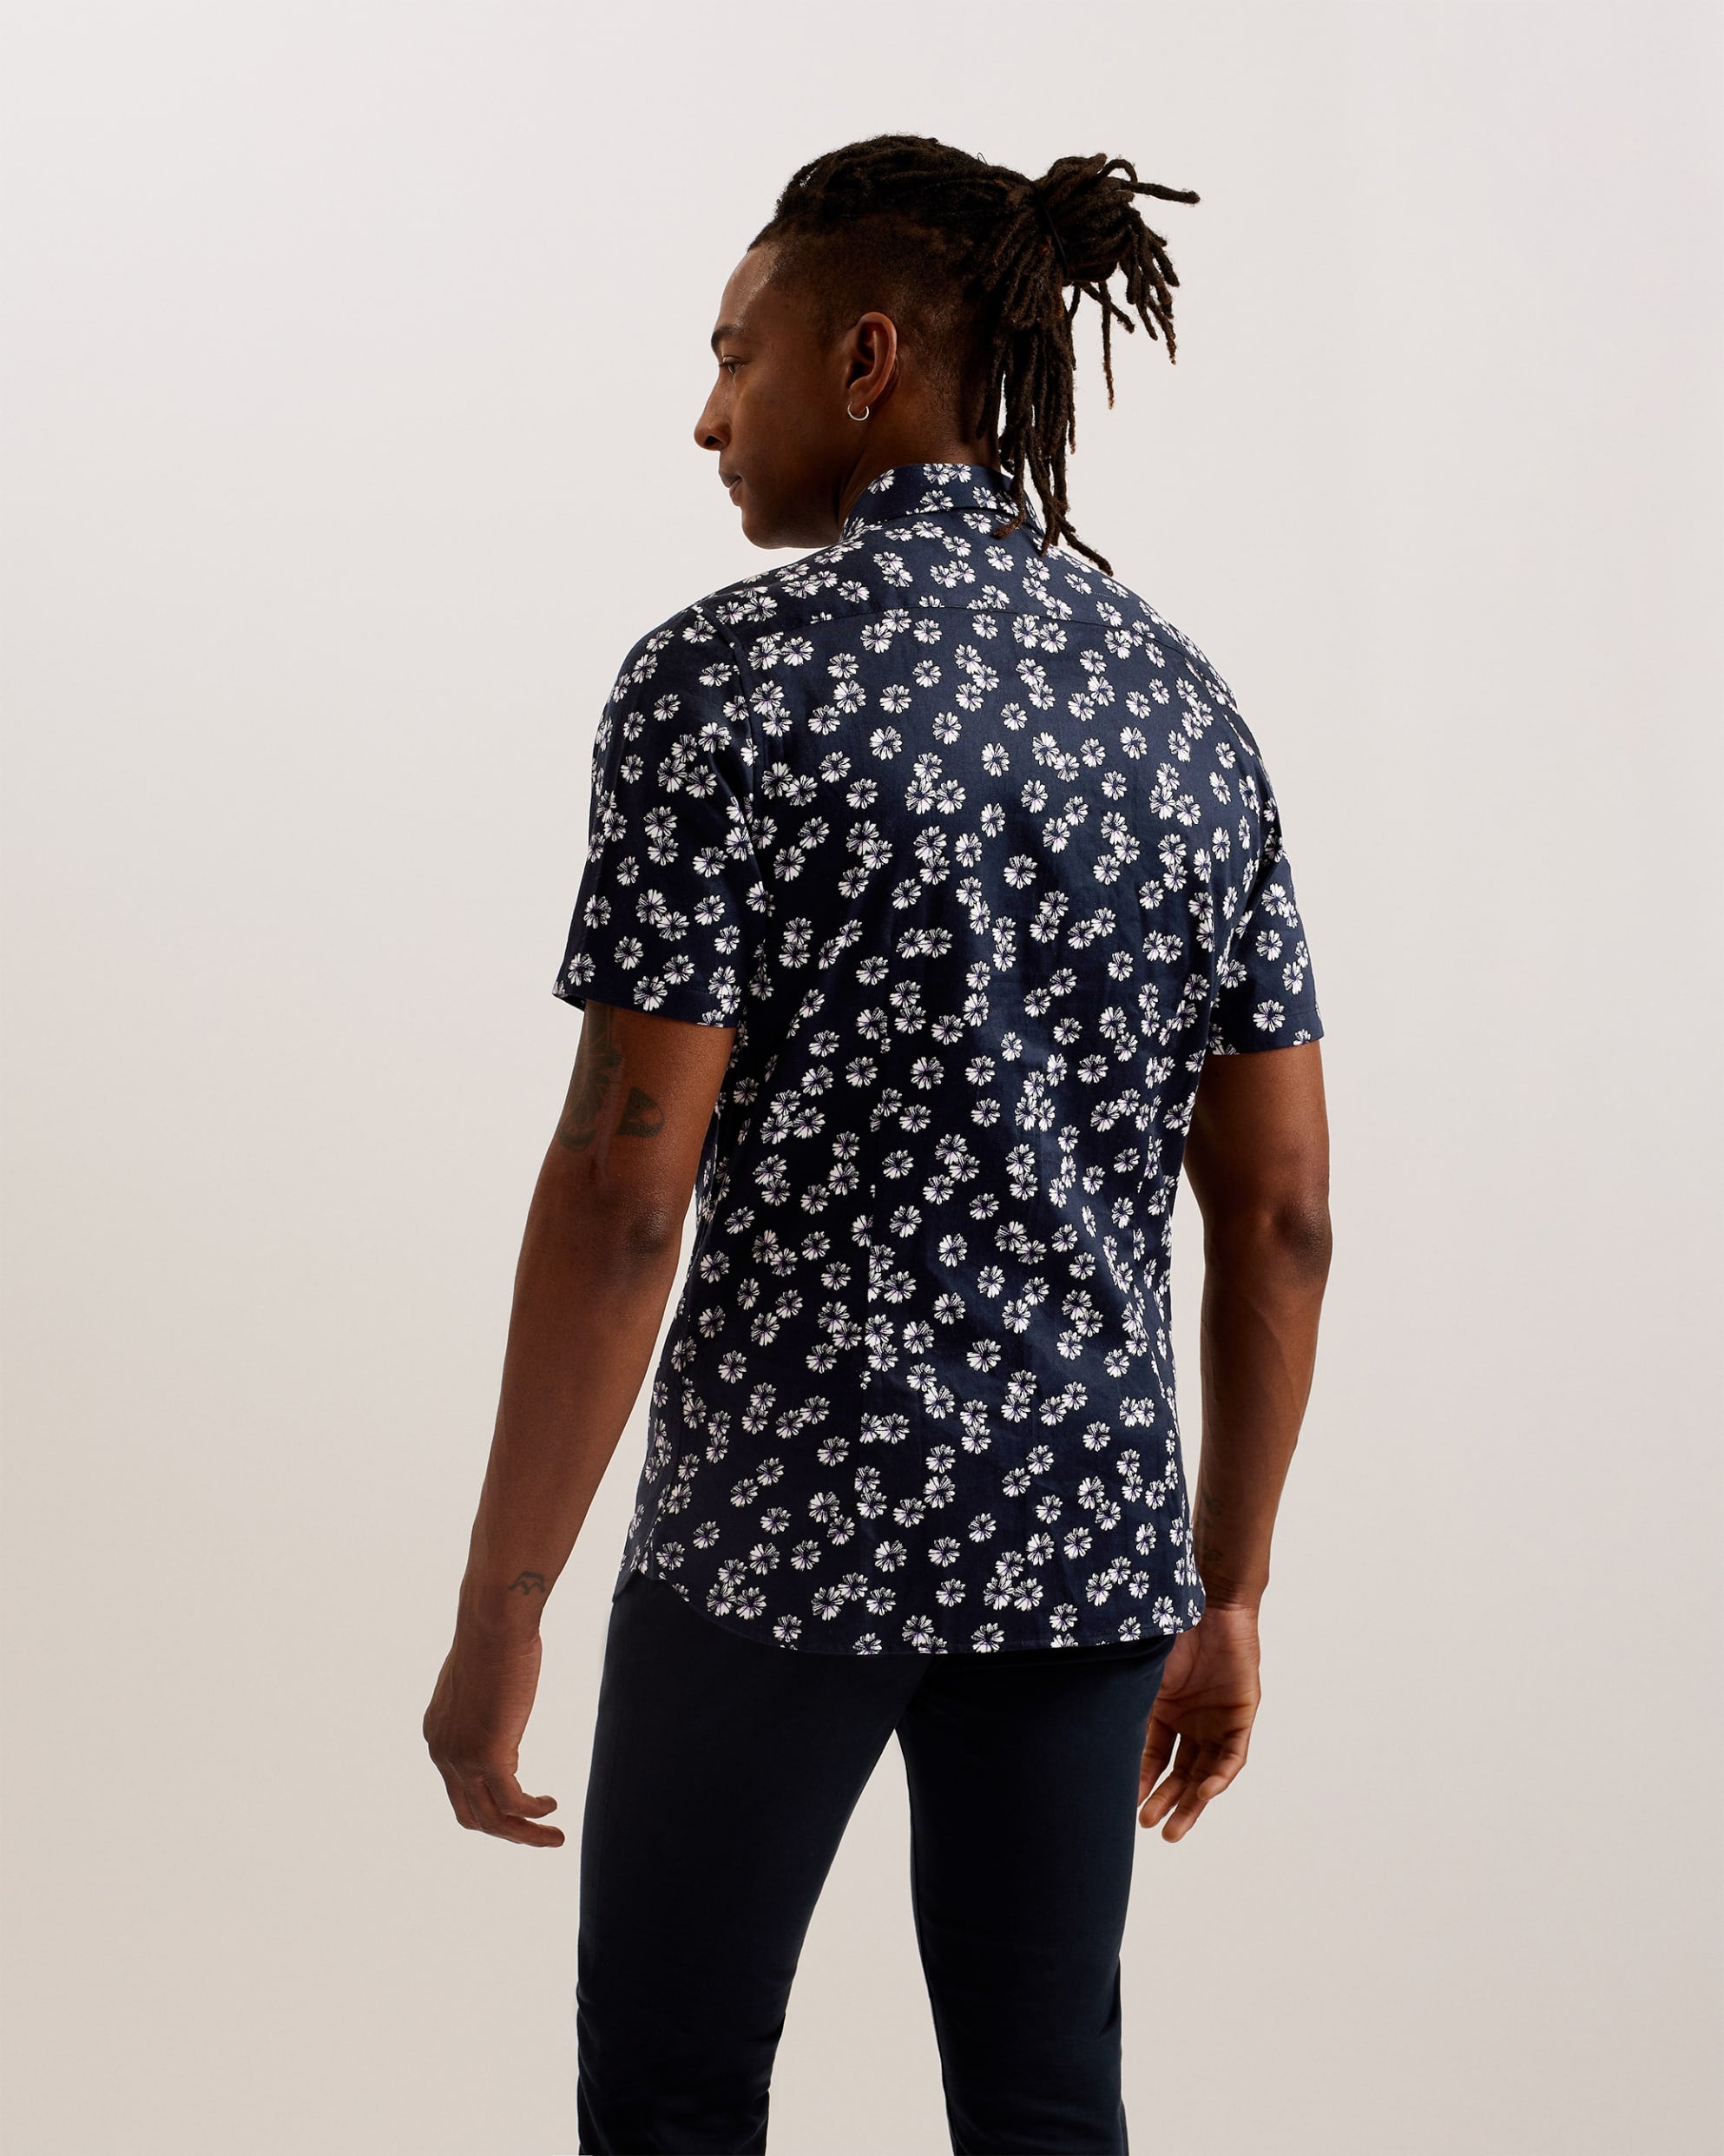 Alfanso Slim Fit Floral Short Sleeve Shirt Navy